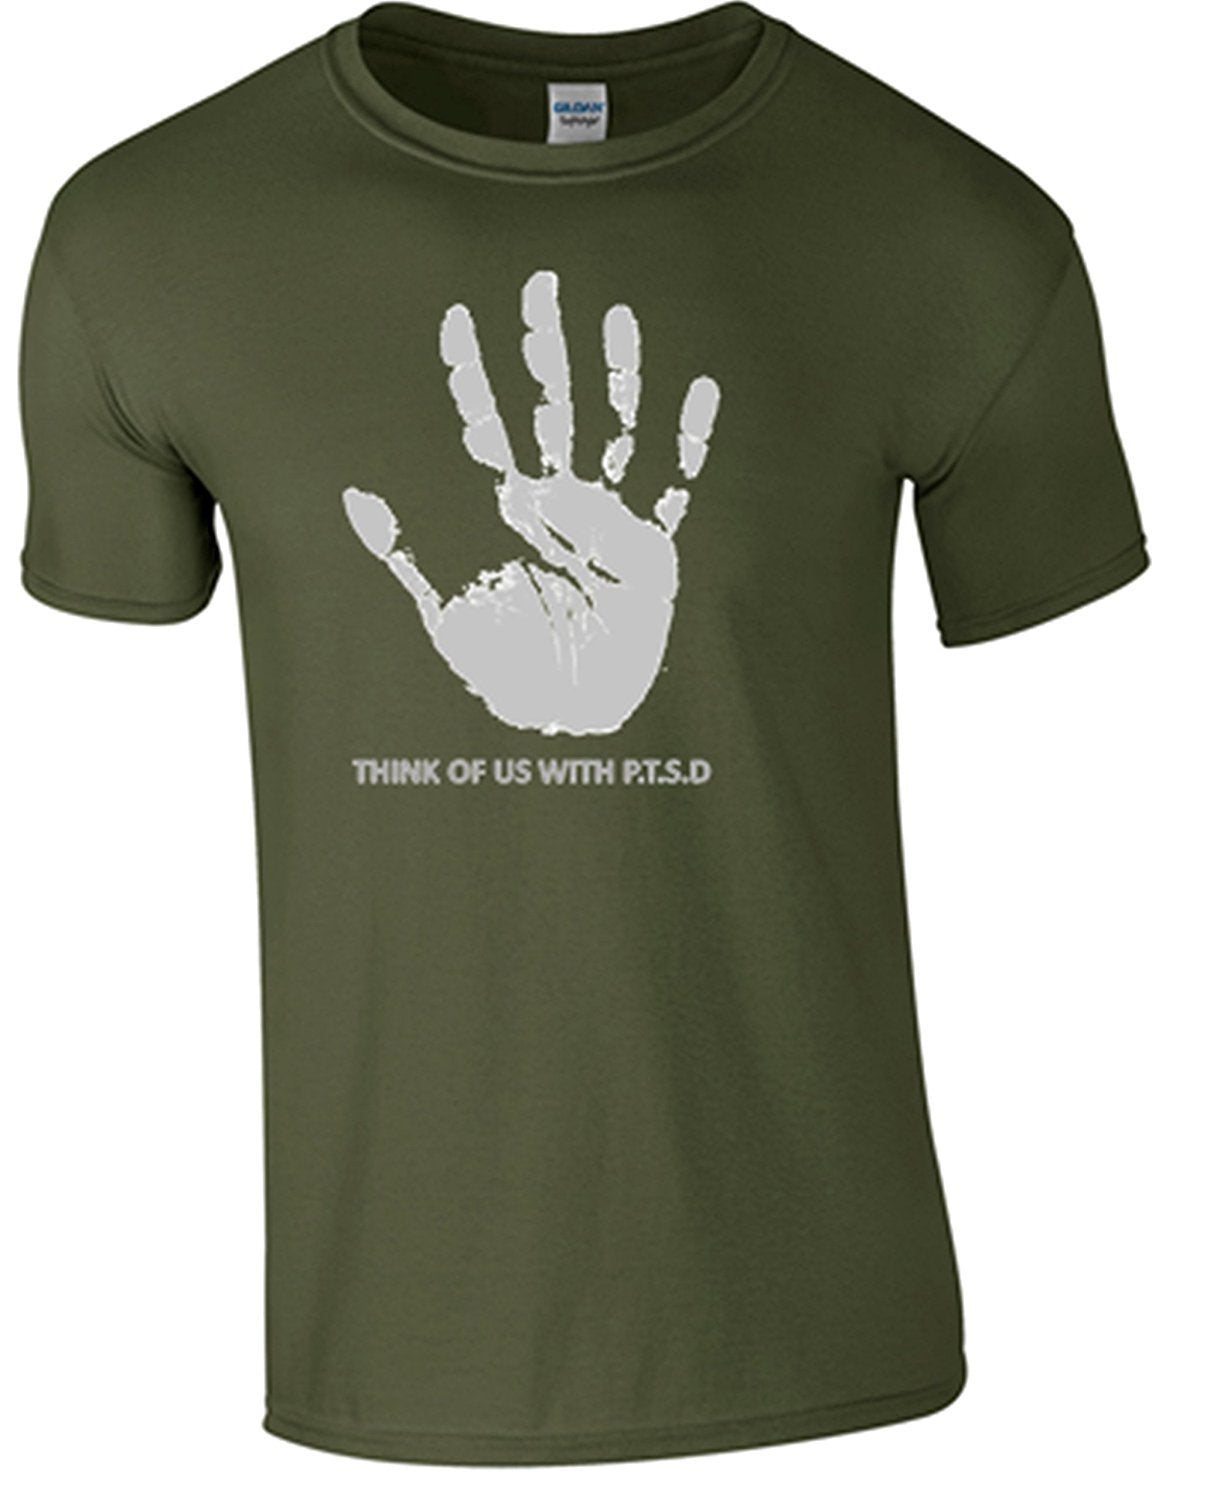 Bear Essentials Clothing. PTSD T-Shirt (S, Green) - Army 1157 kit Small / Green Army 1157 Kit Veterans Owned Business